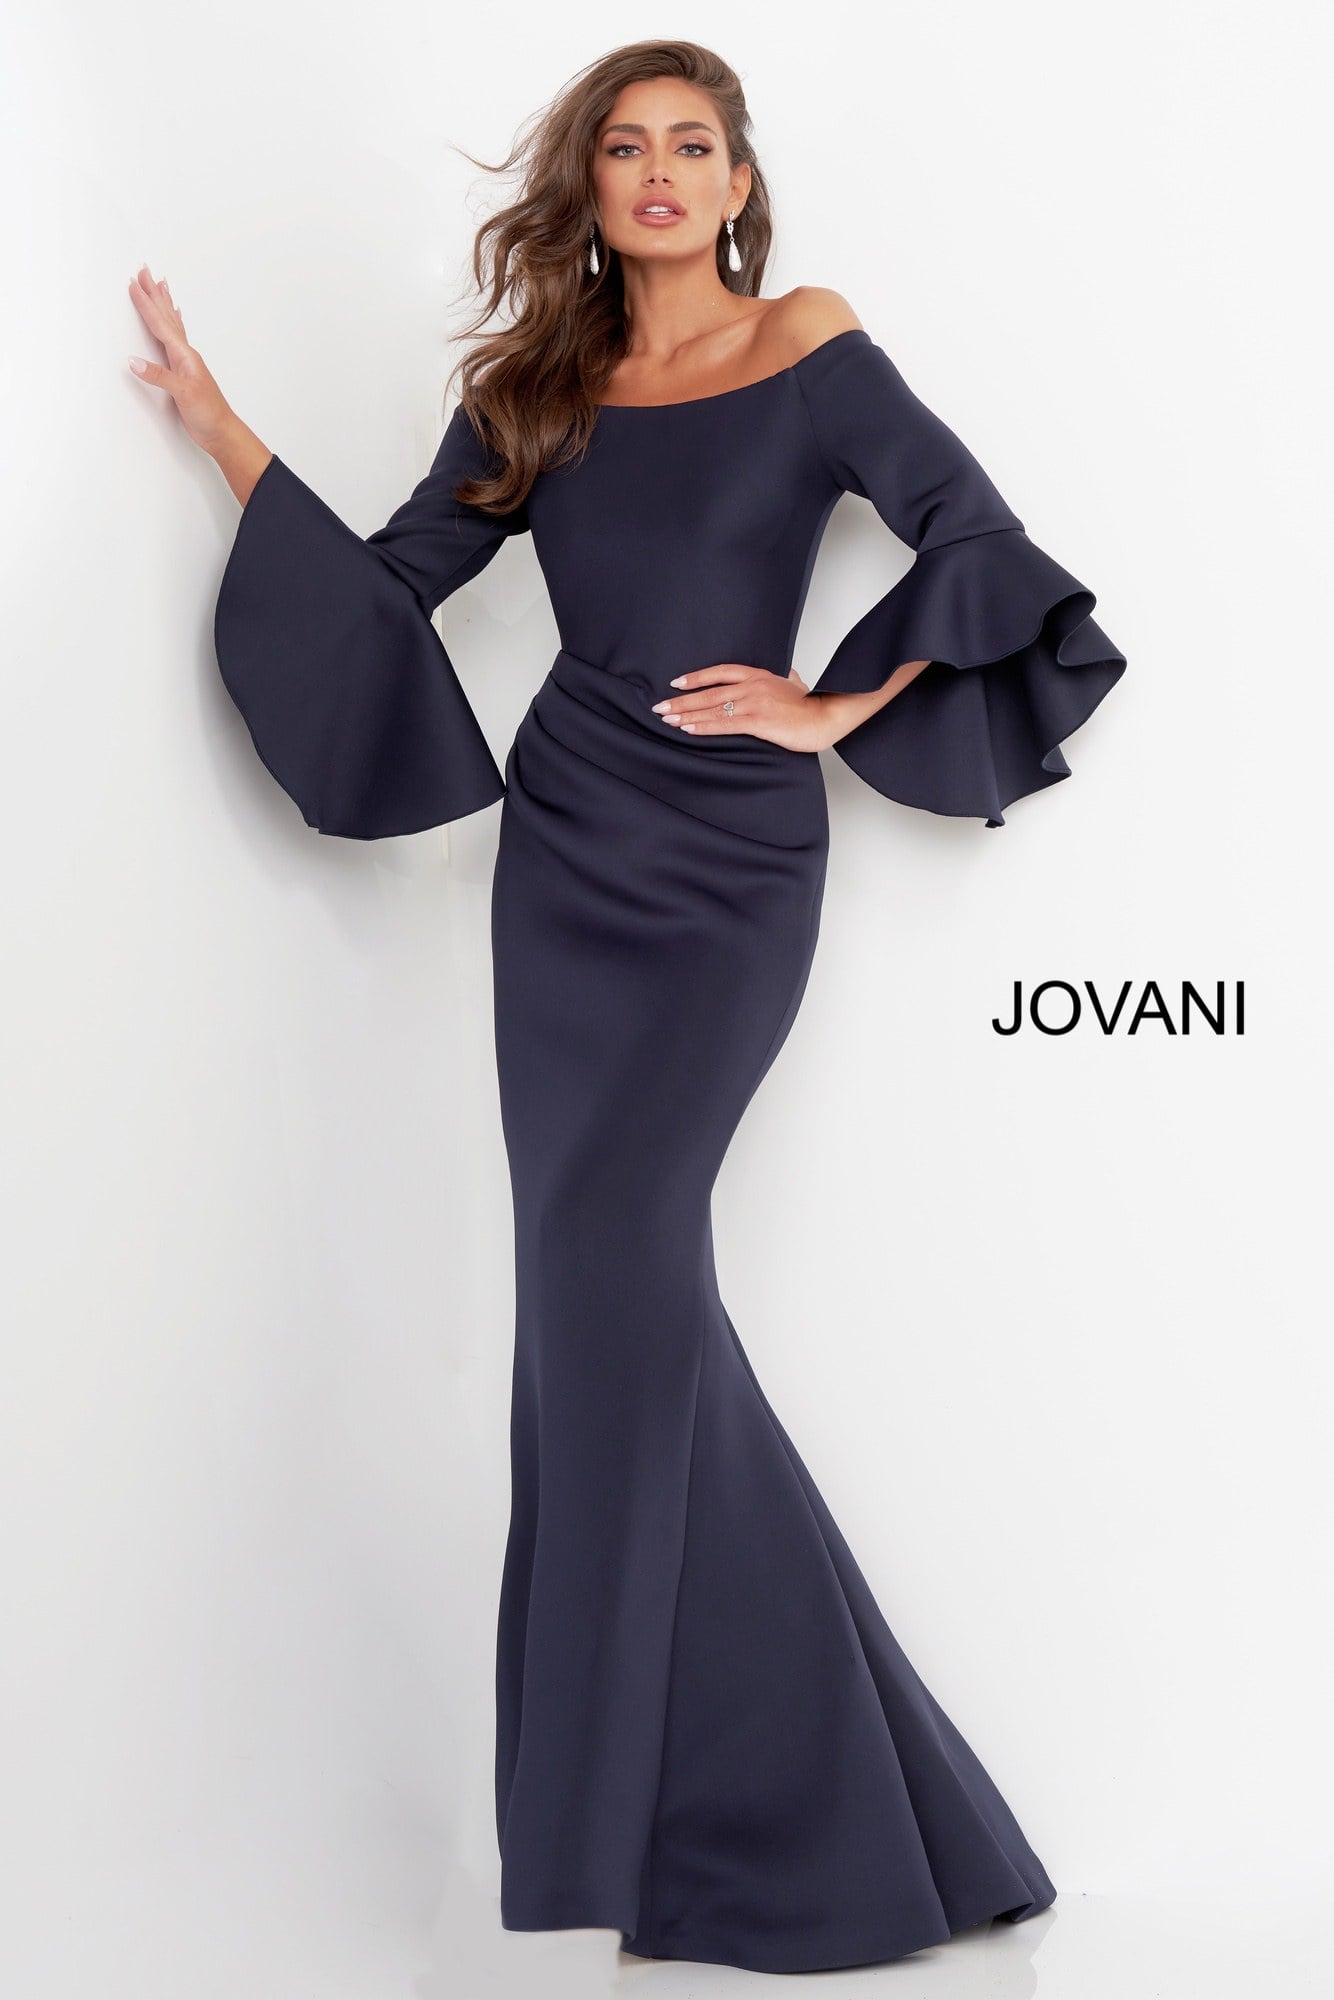 Jovani 59993 Scuba Off the Shoulder Bell Sleeves Mother of the Bride Dress